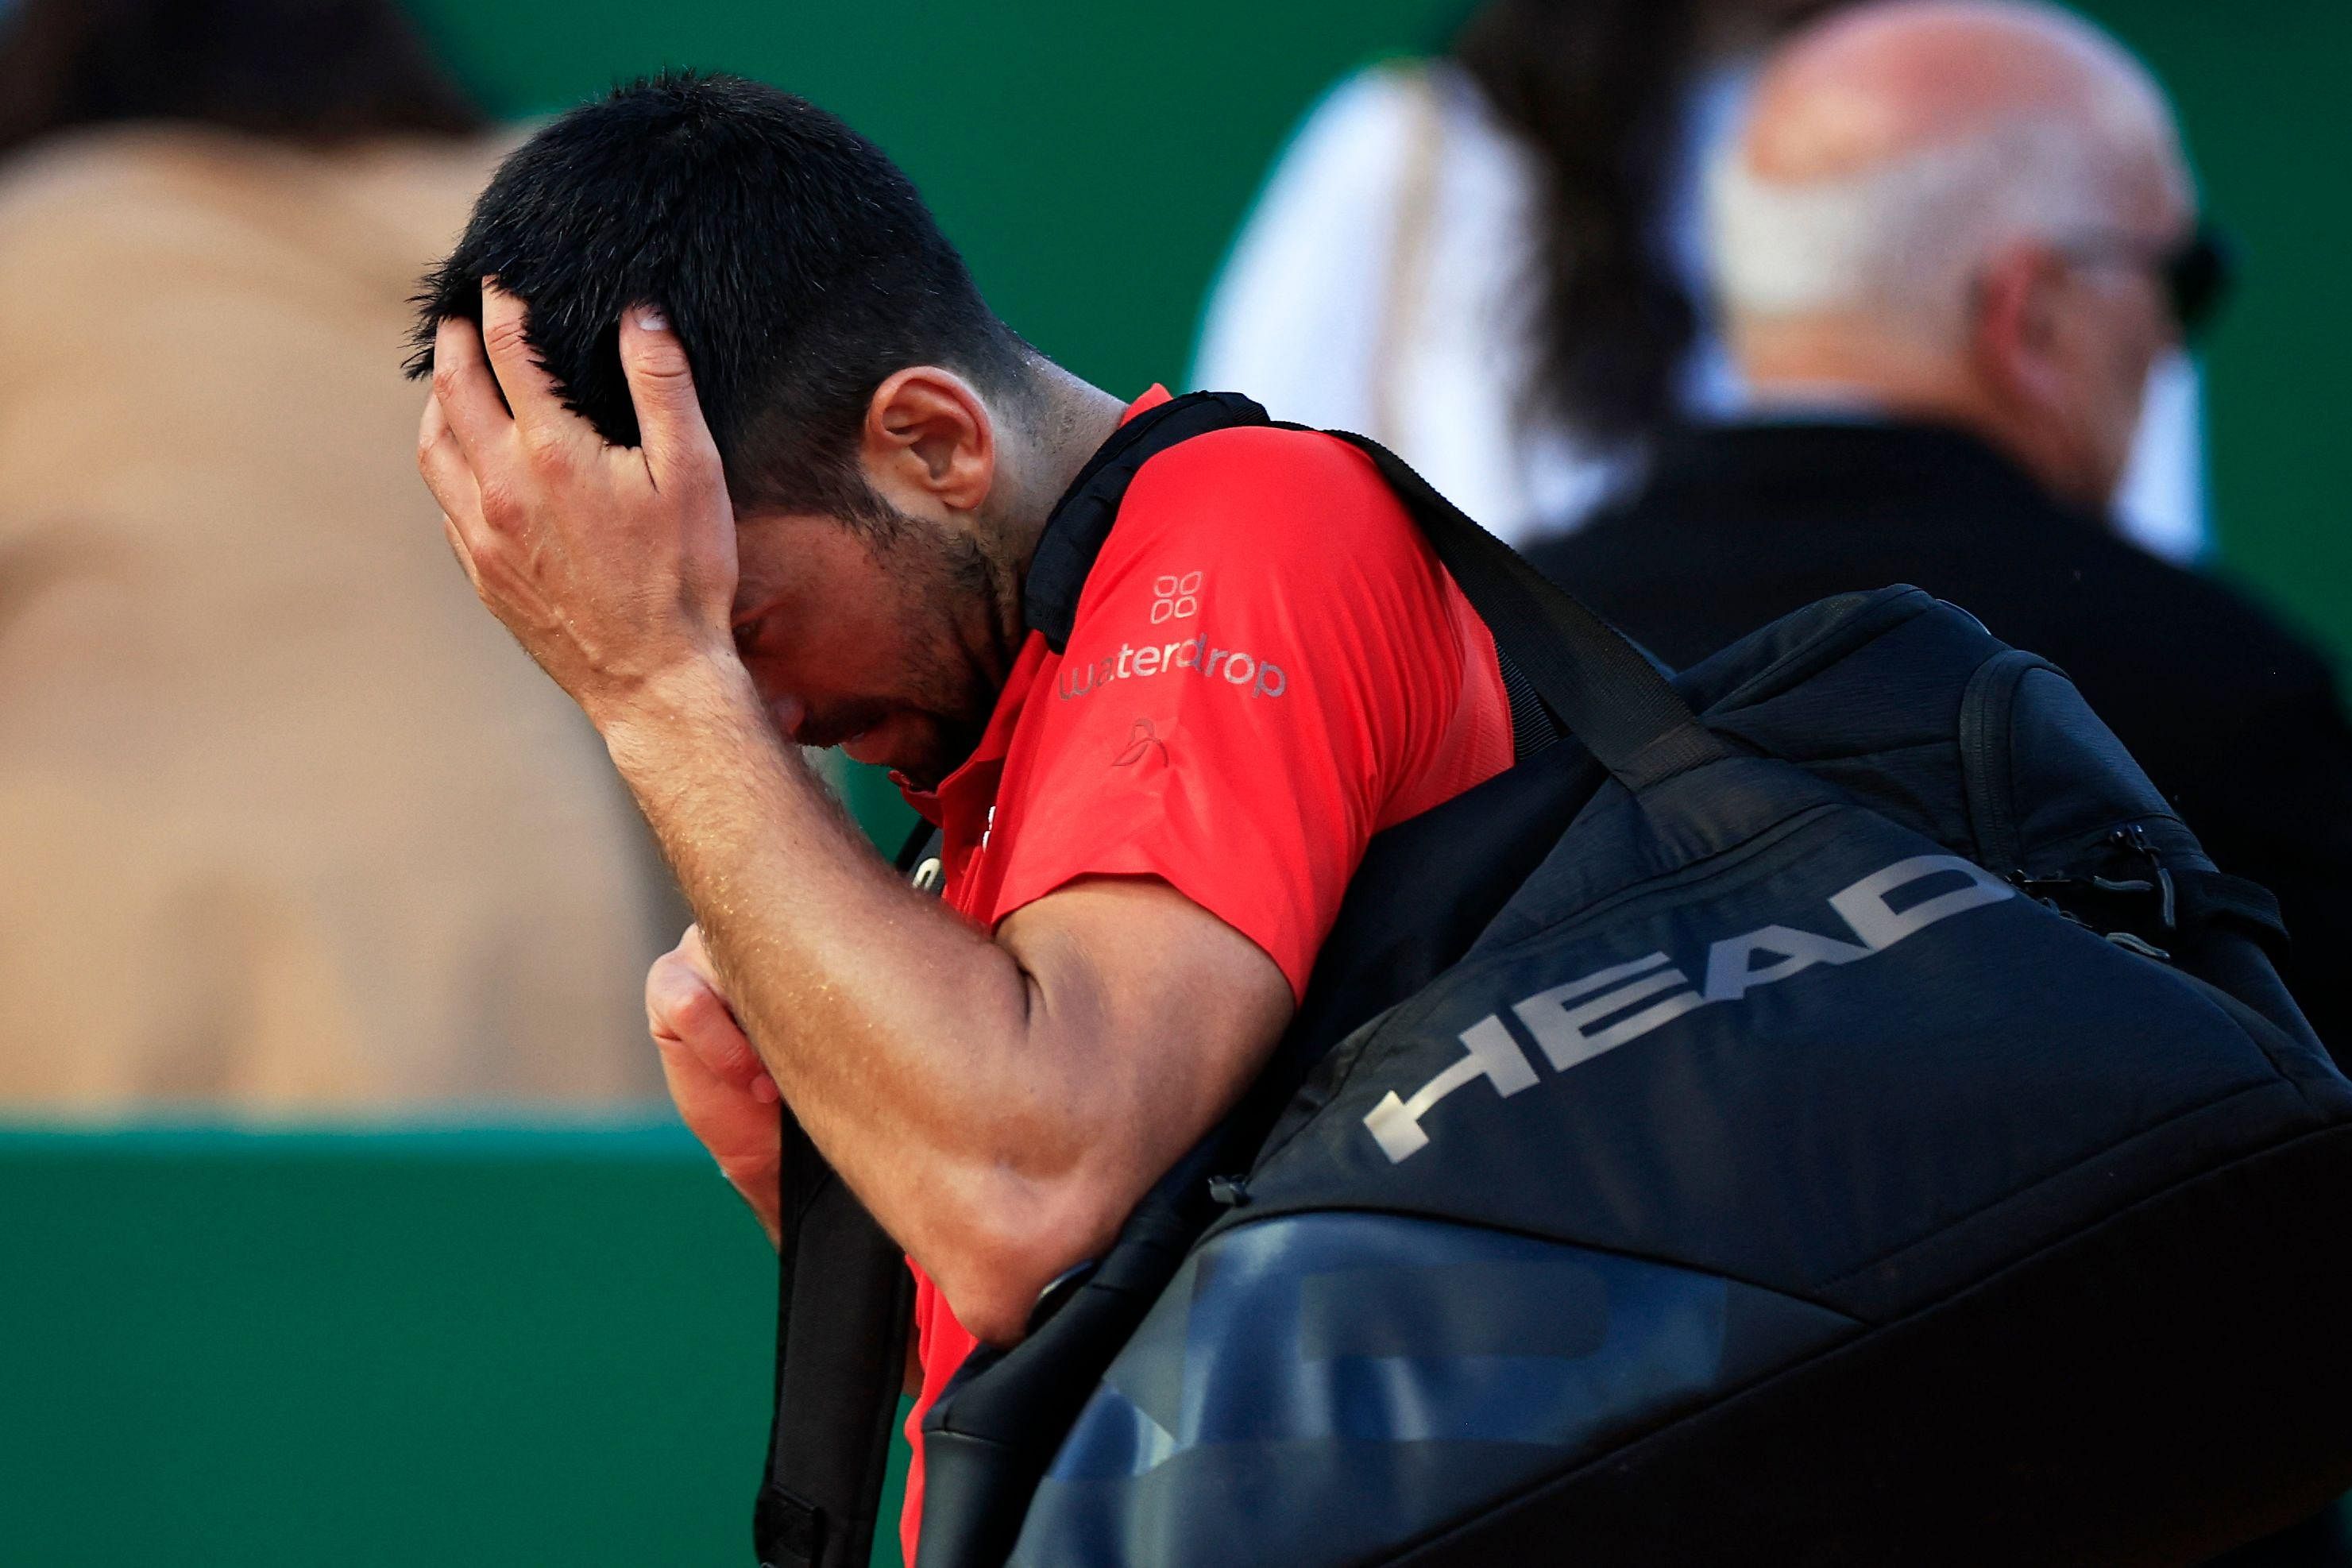 You can call Novak Djokovic vulnerable. Just expect a defiant response